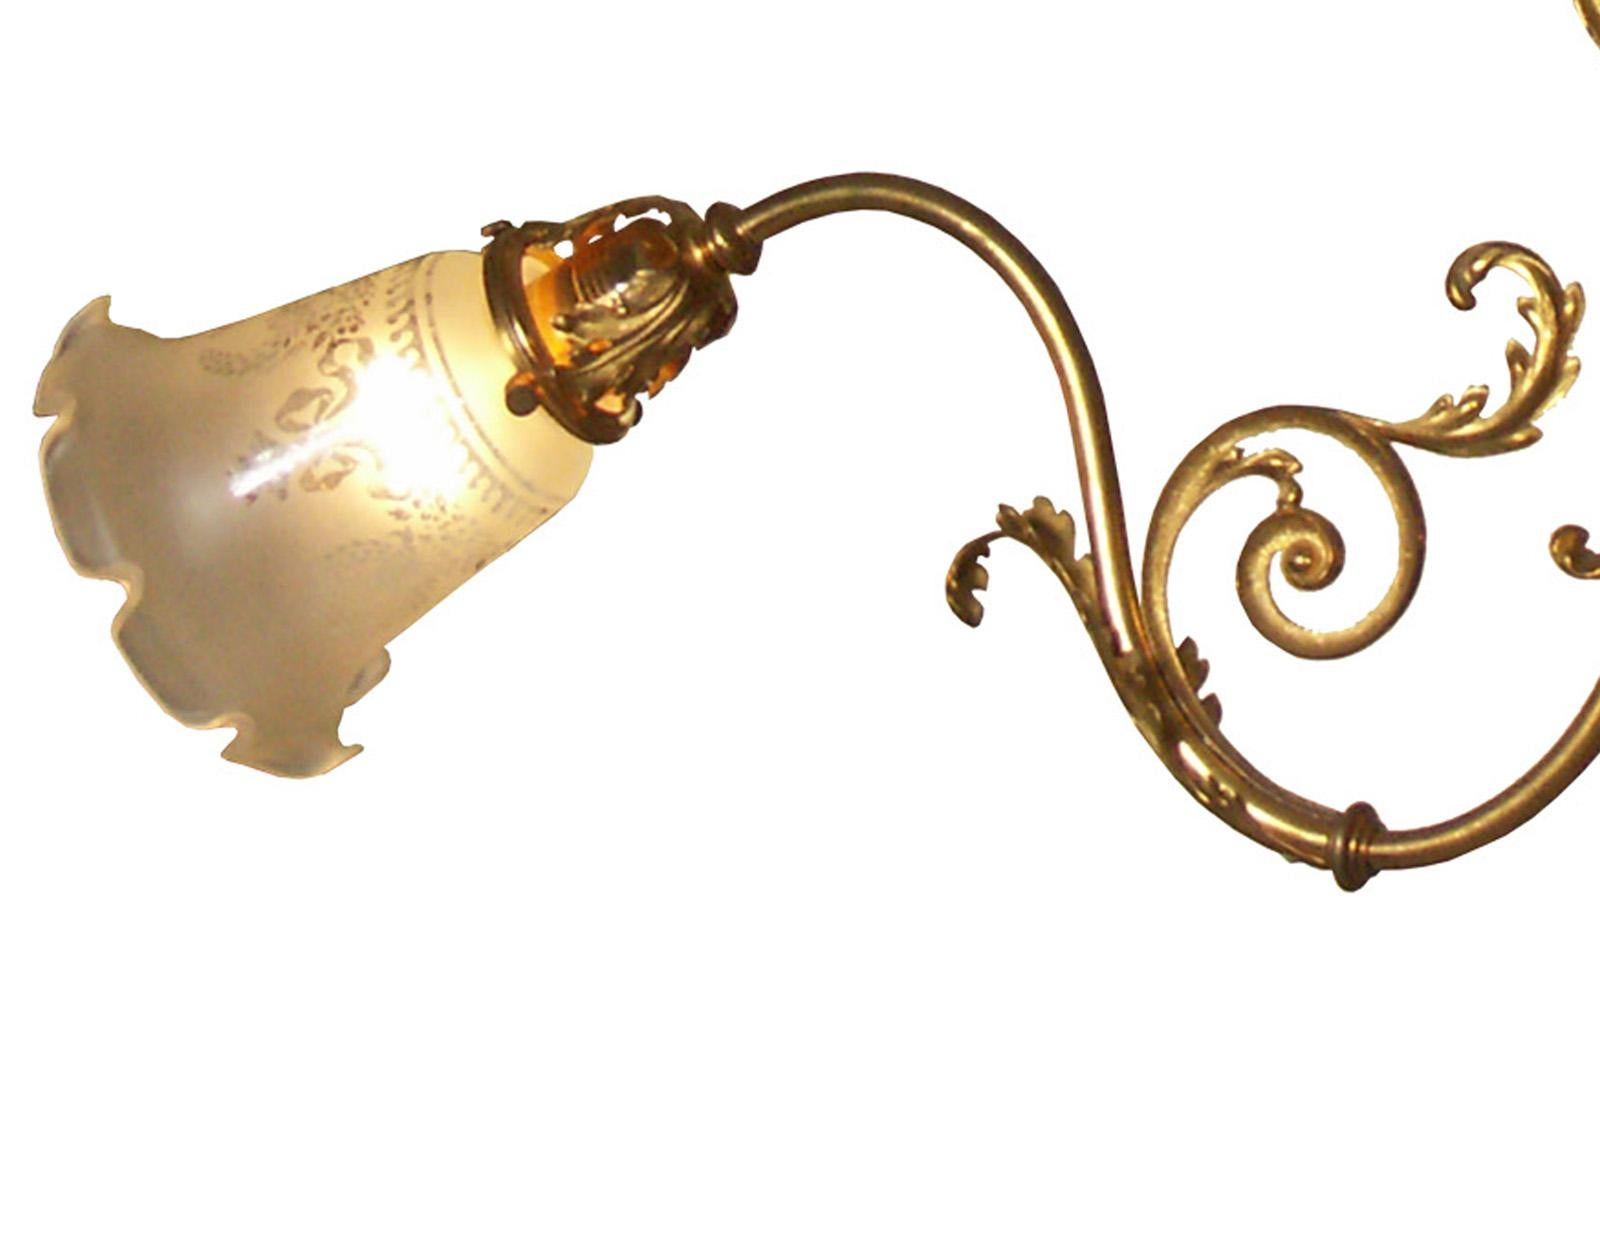 In Vienna the private houses were connected to the electricity grid, circa 1900. At that time the common gaslights were changed to the new technology. As well new chandelier were built for electric light only. This typical Viennese chandelier has